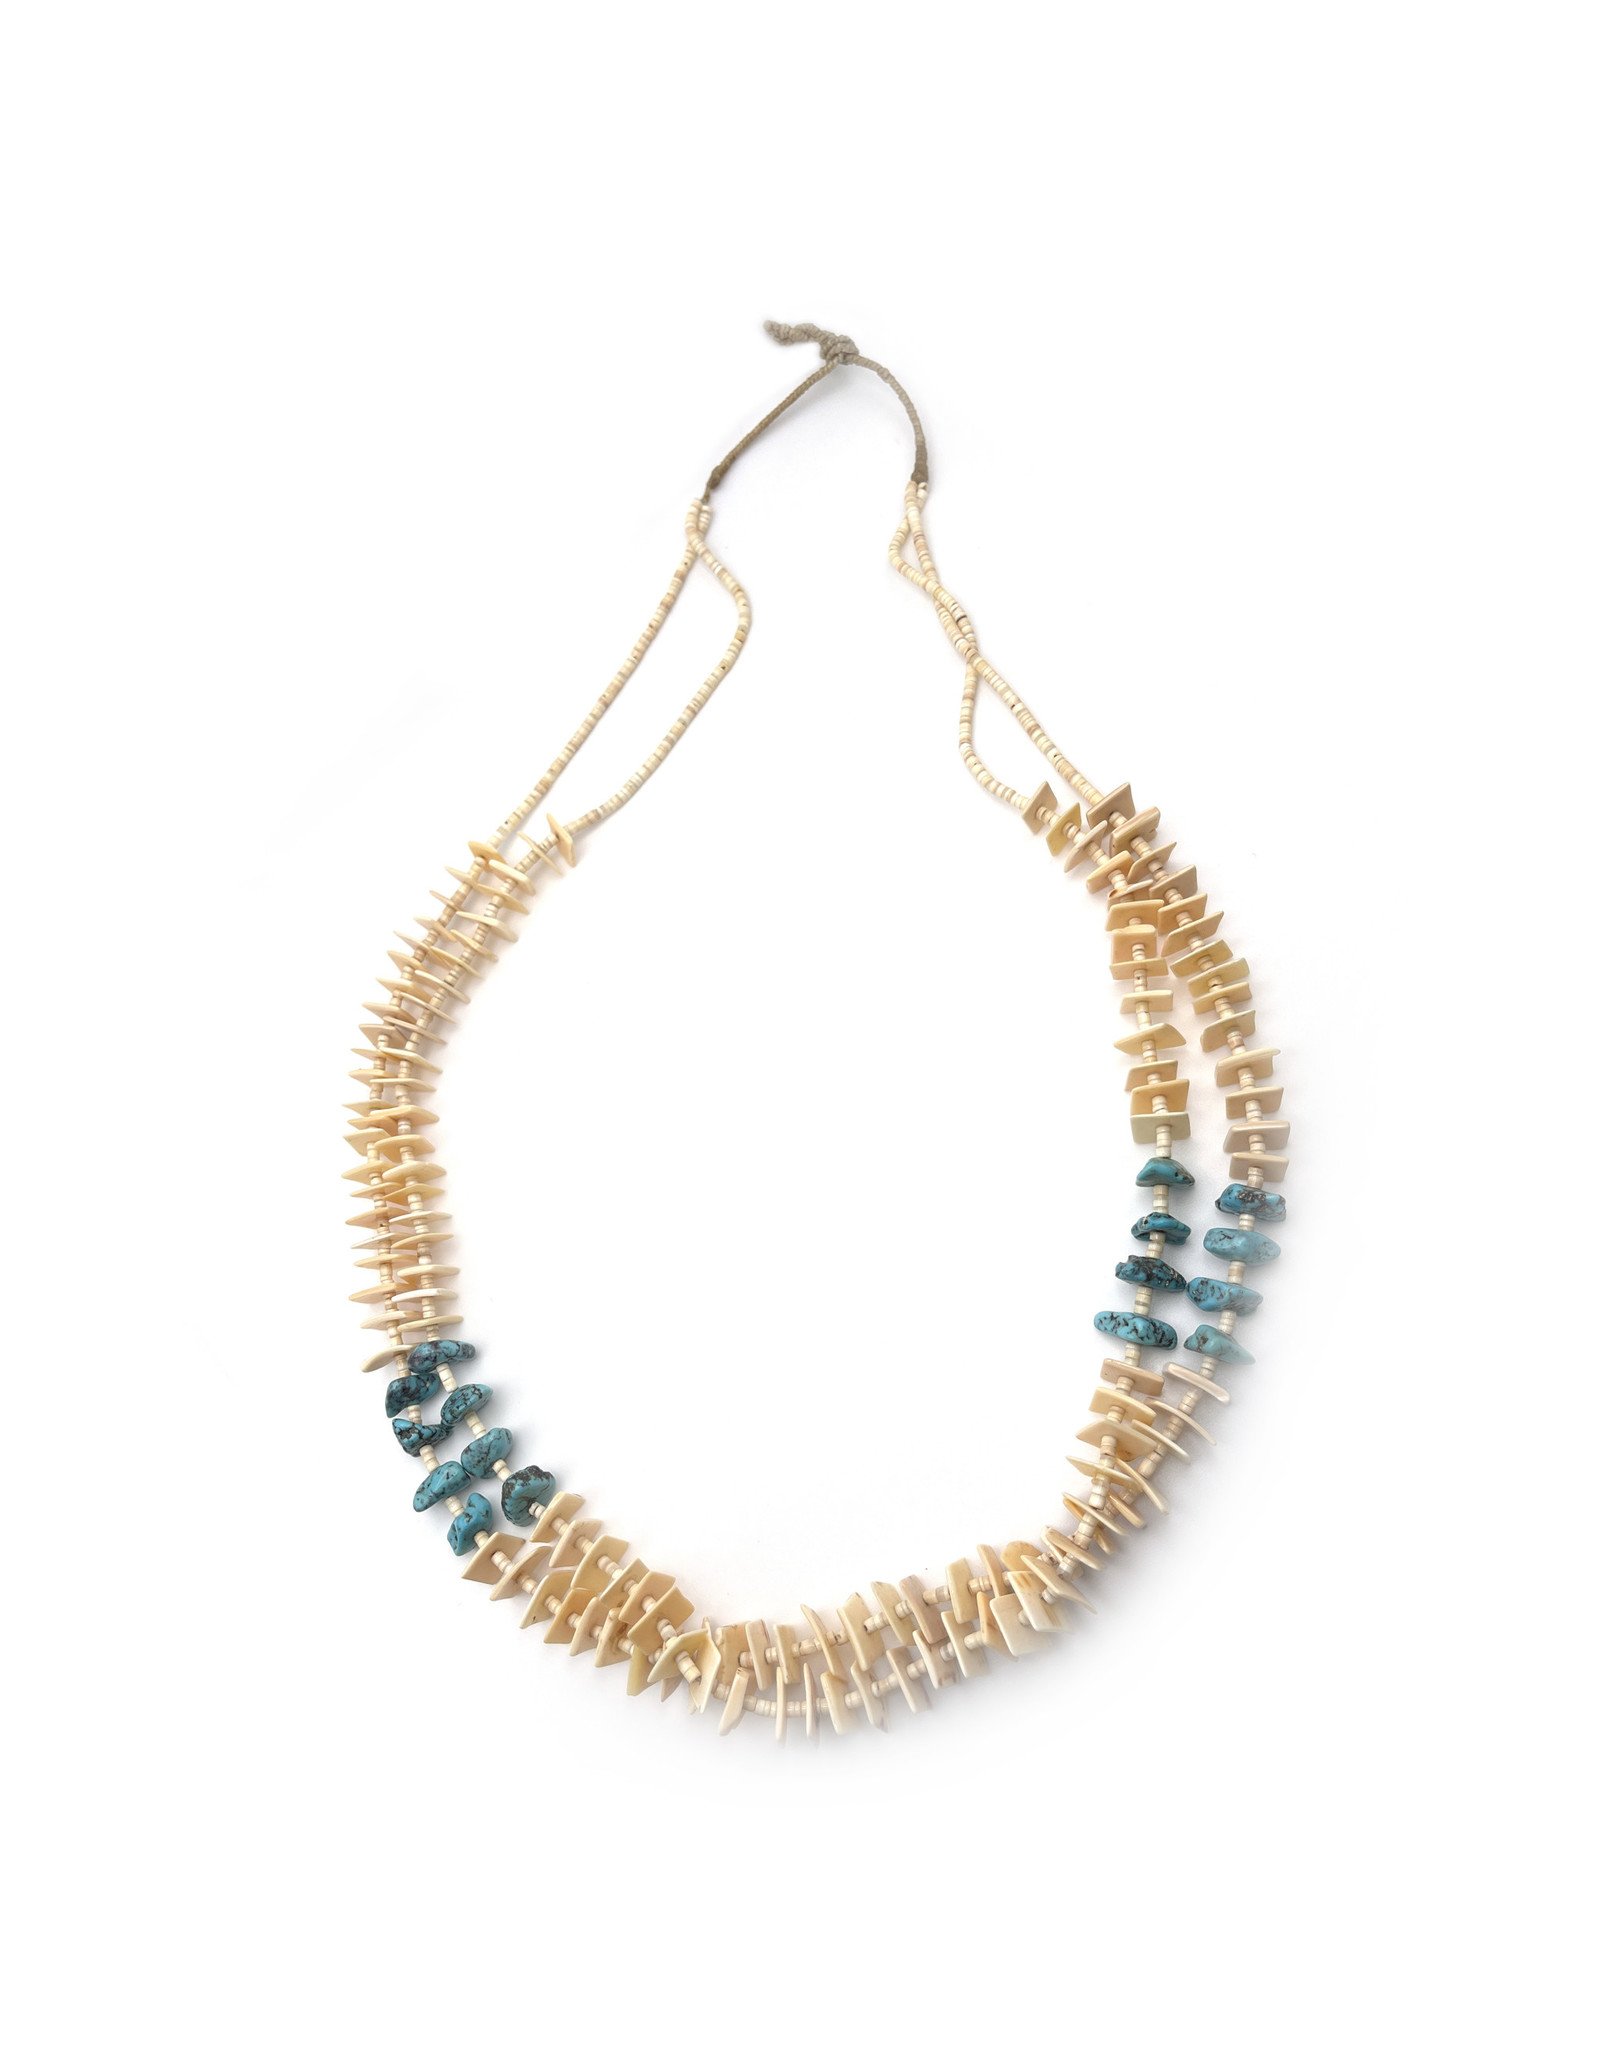 Heishe Necklace with Turquoise and Shell Beads